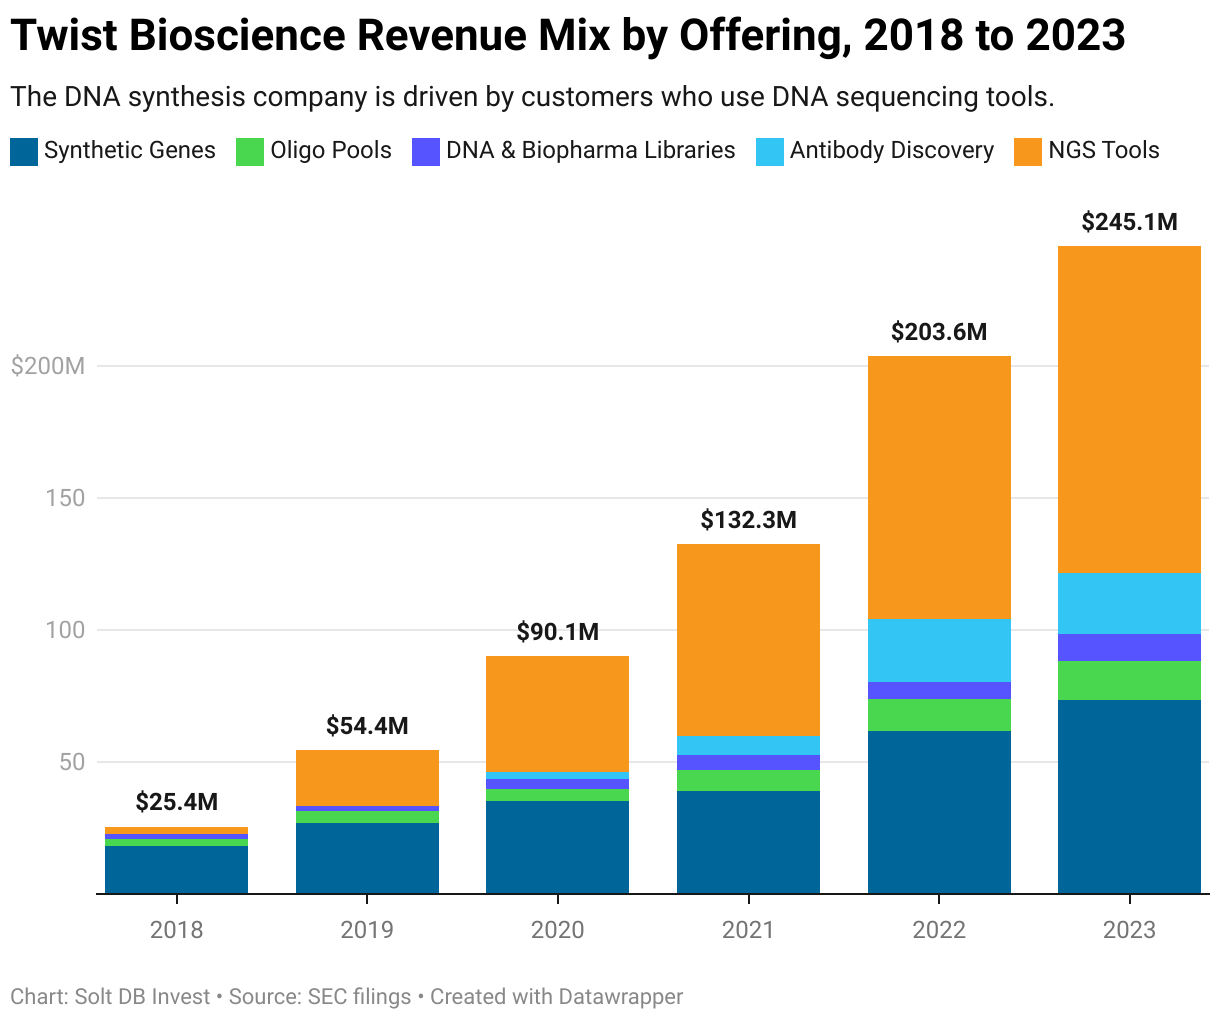 A stacked bar chart showing annual revenue mix by offering for Twist Bioscience from 2018 to 2023.